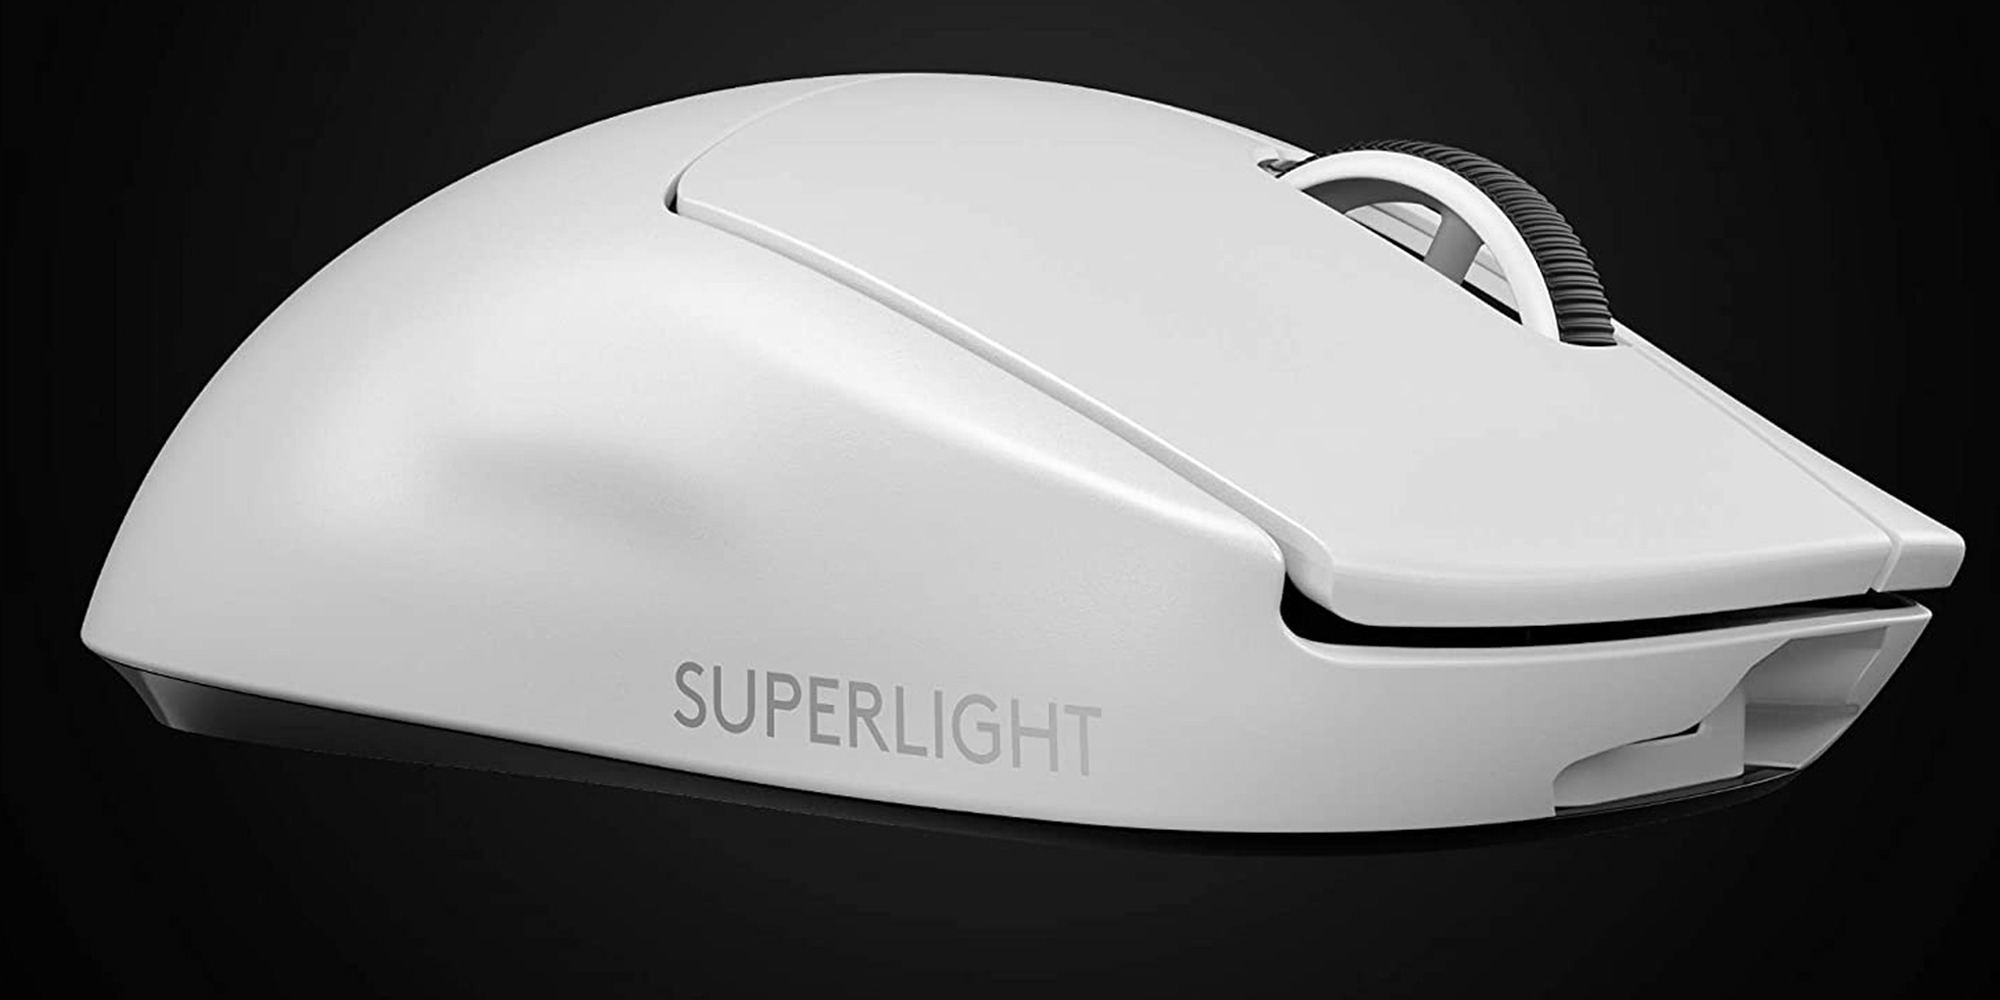 Logitech's G Pro X SUPERLIGHT wireless gaming mouse nears all-time 